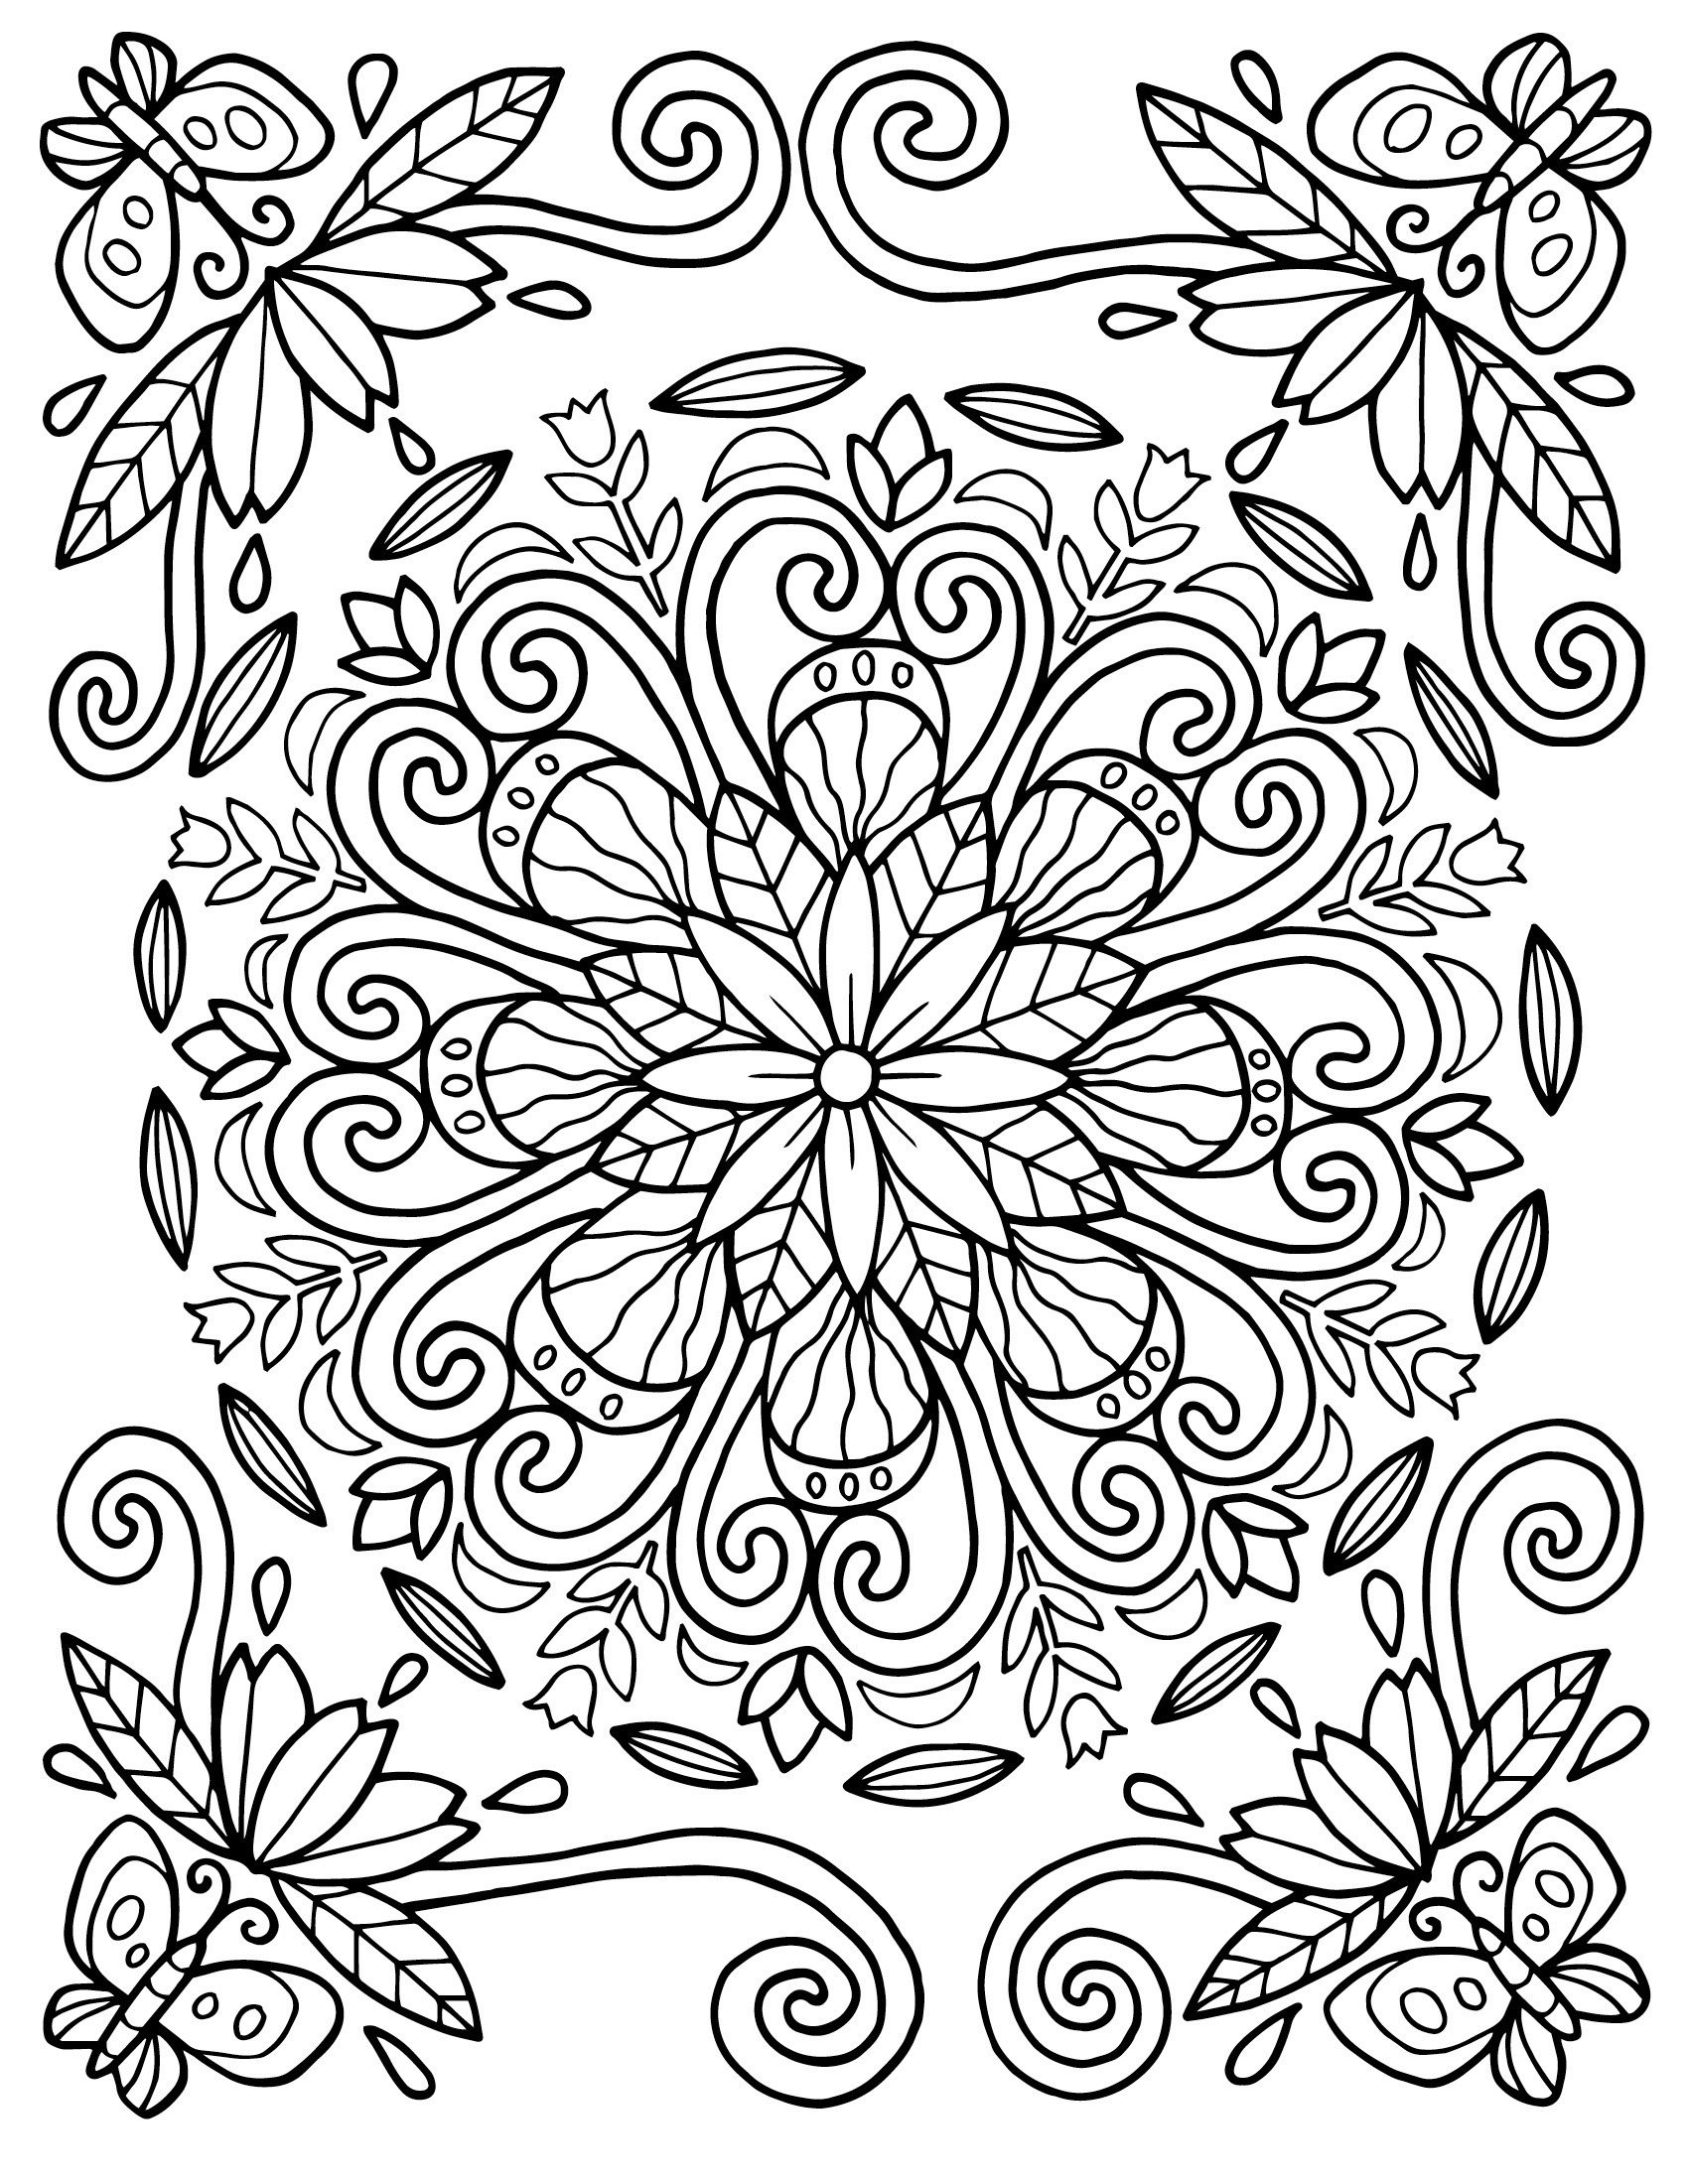 Cartoon Design Coloring Pages with simple drawing